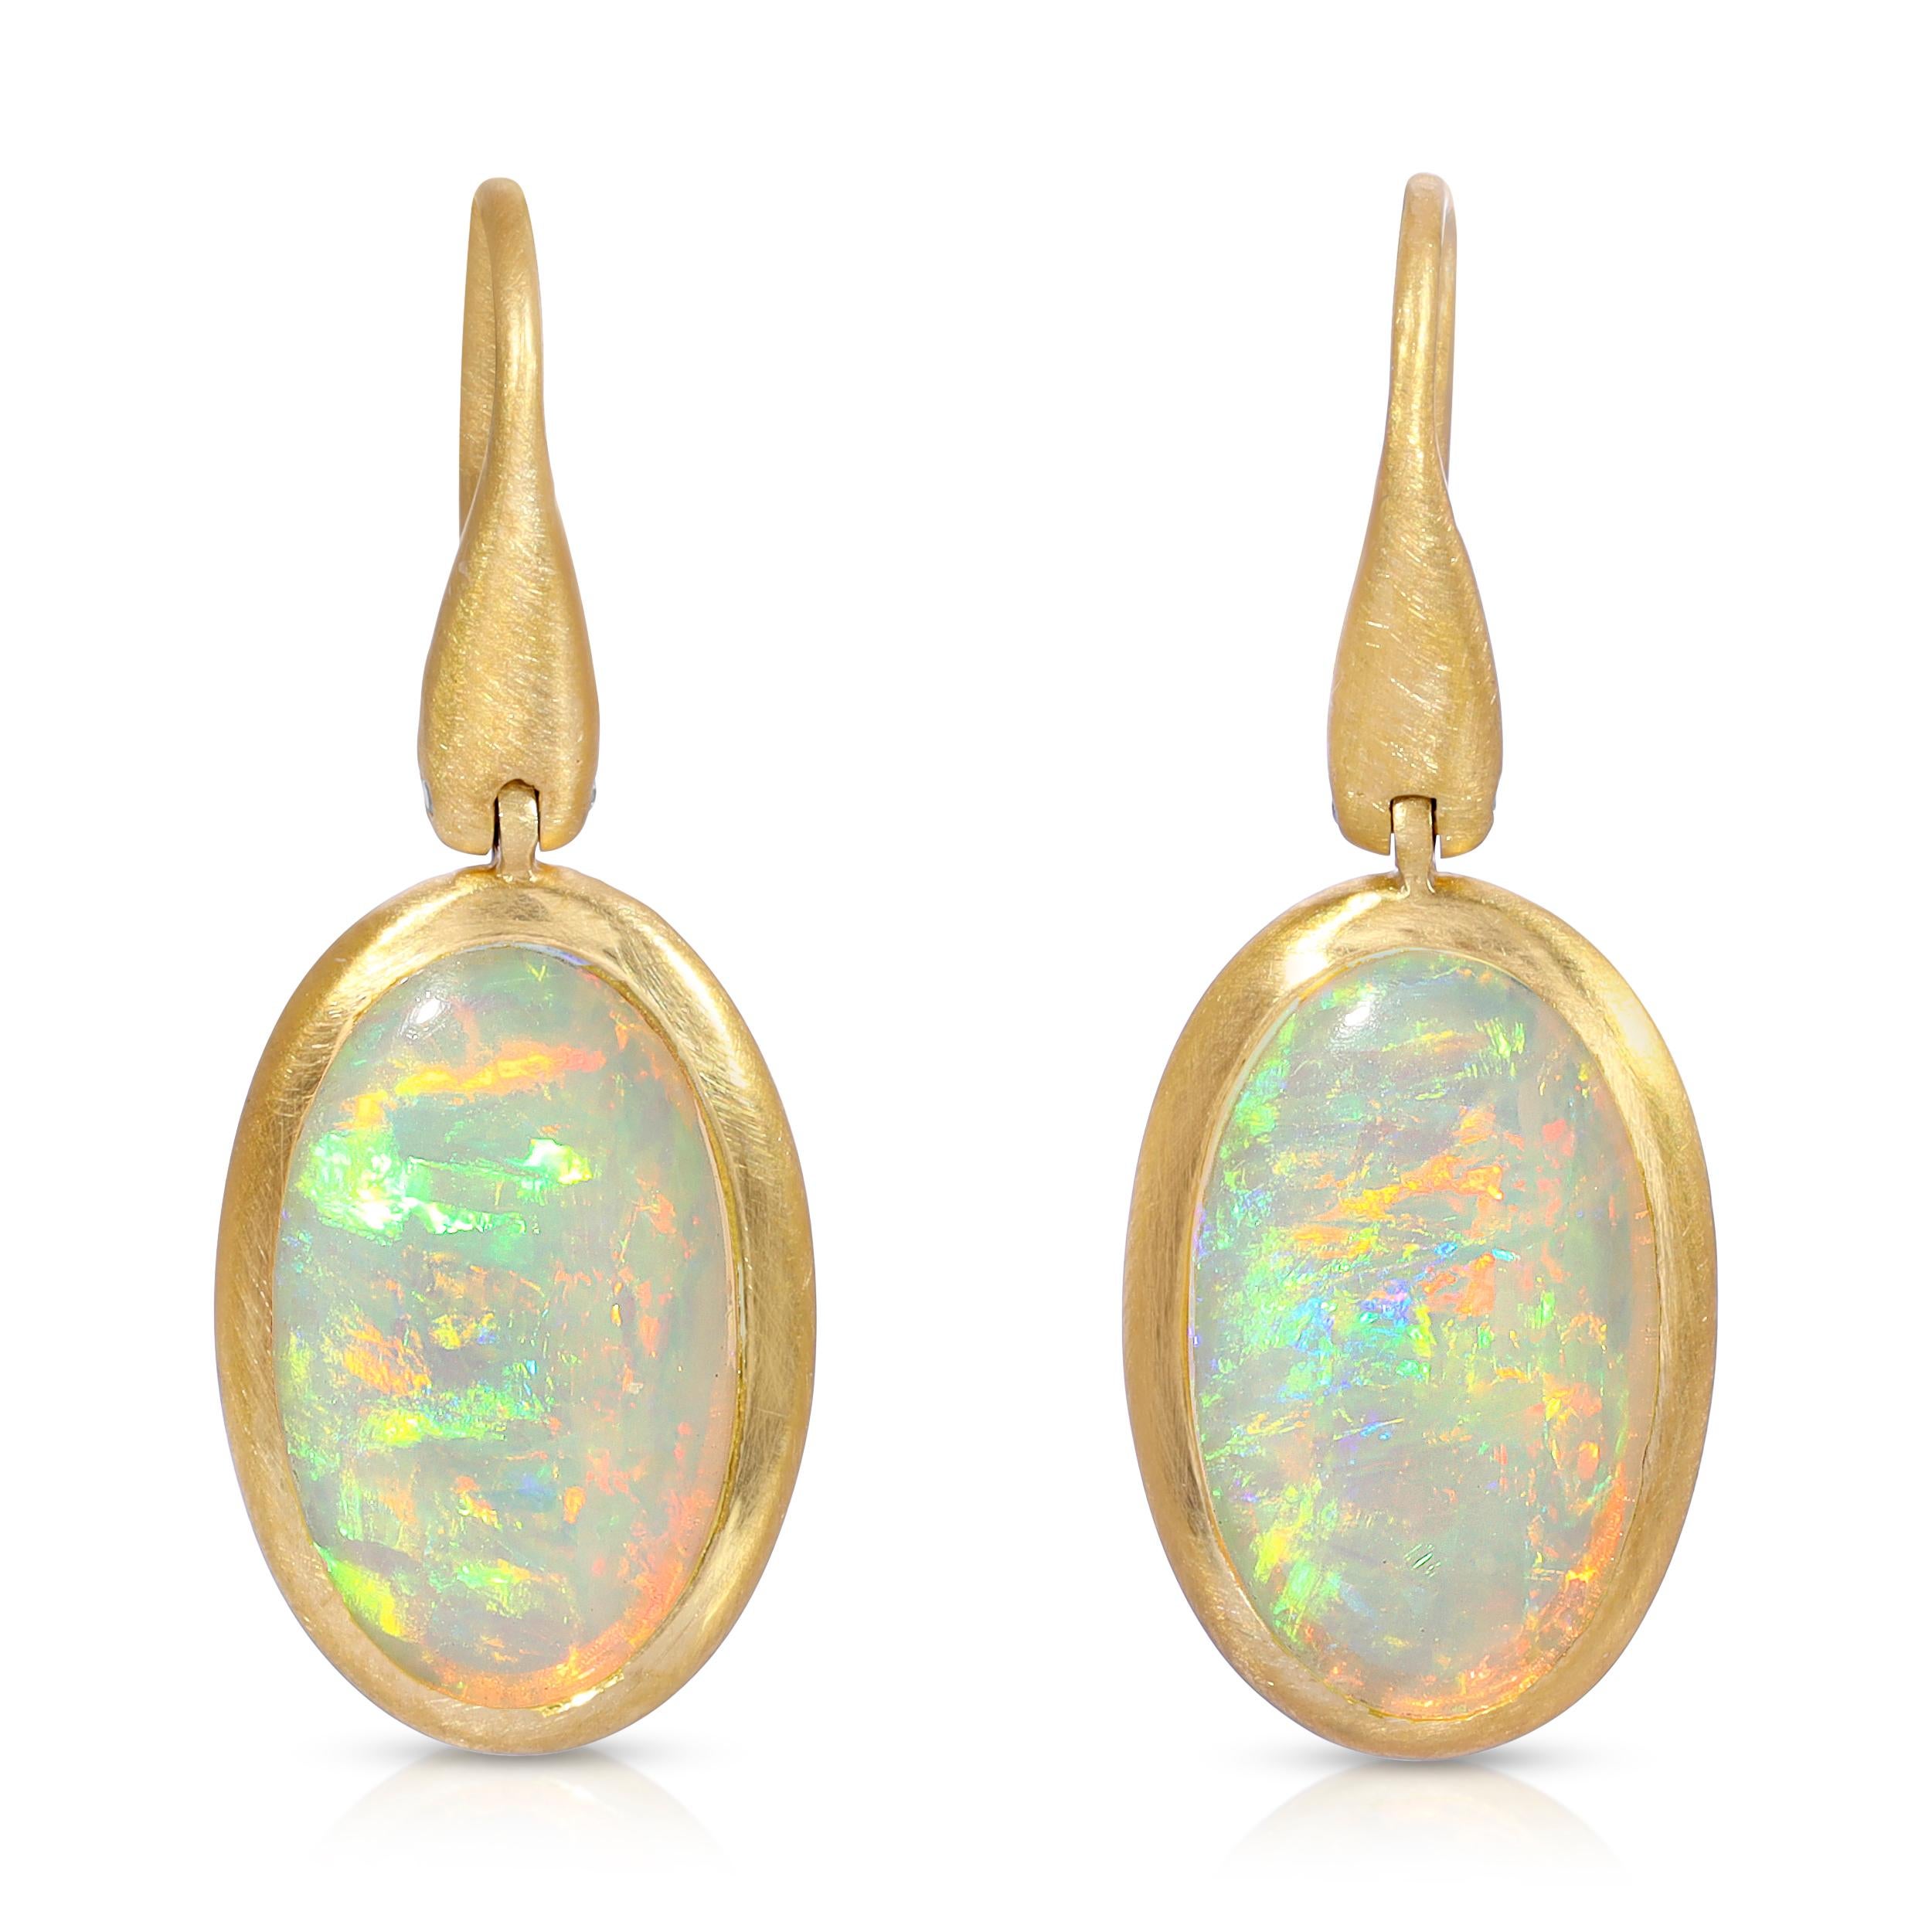 These beautiful 2.48ct Winton Australia Crystal Opal Drop Earrings are set  in 18k Matte Yellow Gold with Diamond punctuation on the side hinge. They were handmade in Los Angeles by my master craftsmen and me.
